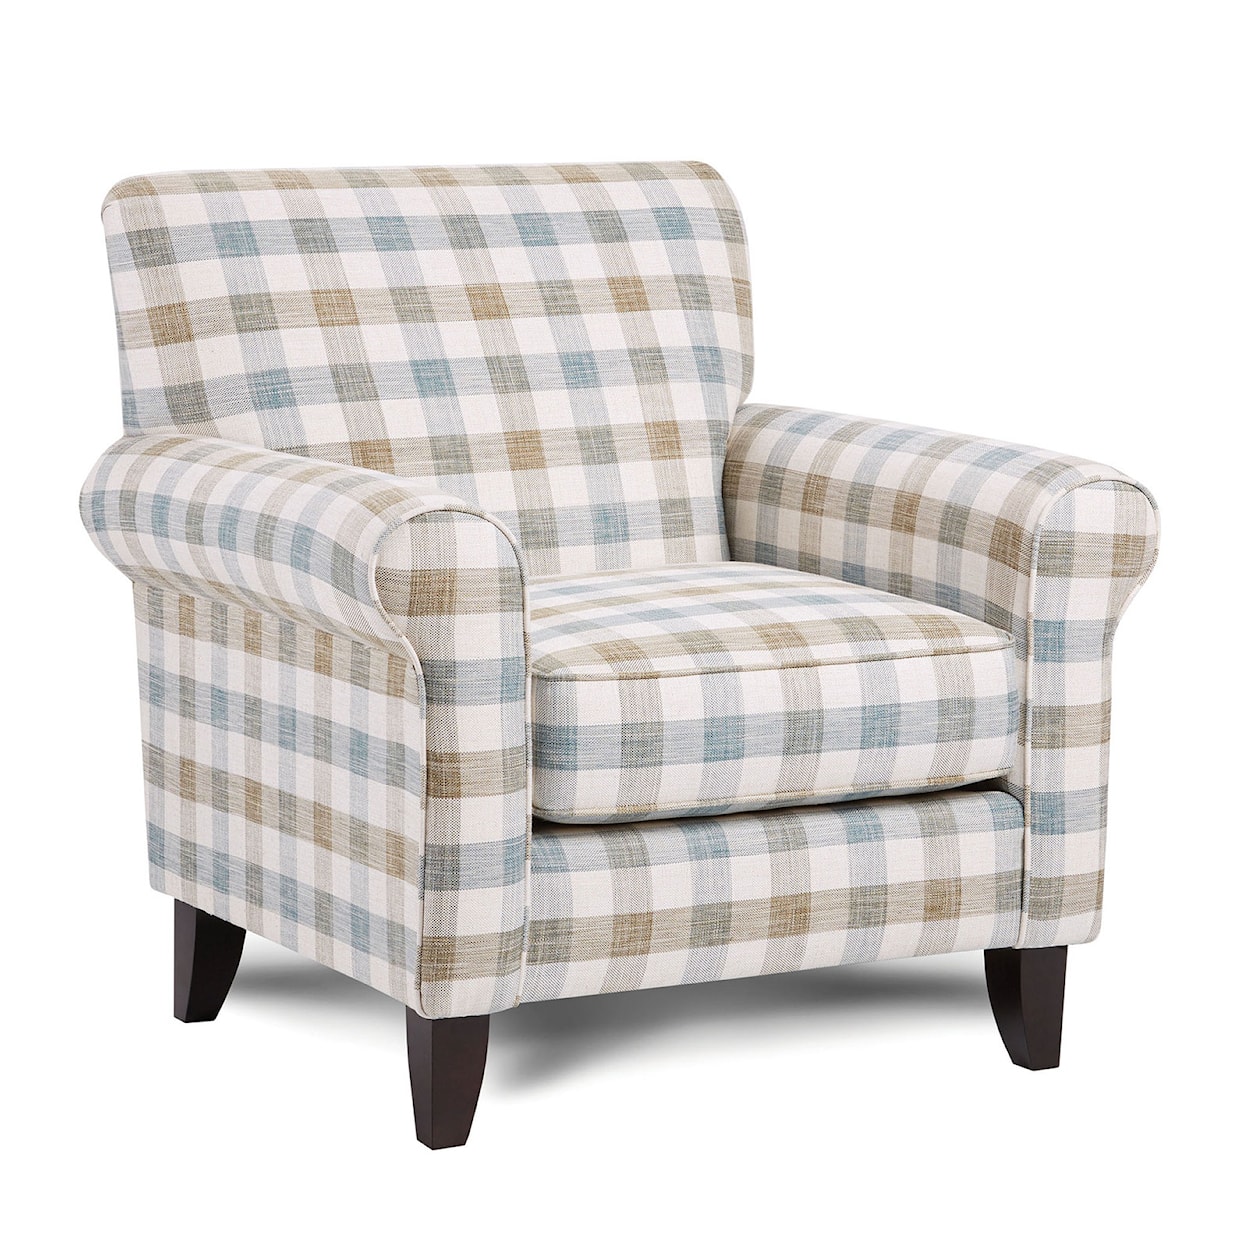 Furniture of America Cardigan Accent Chair